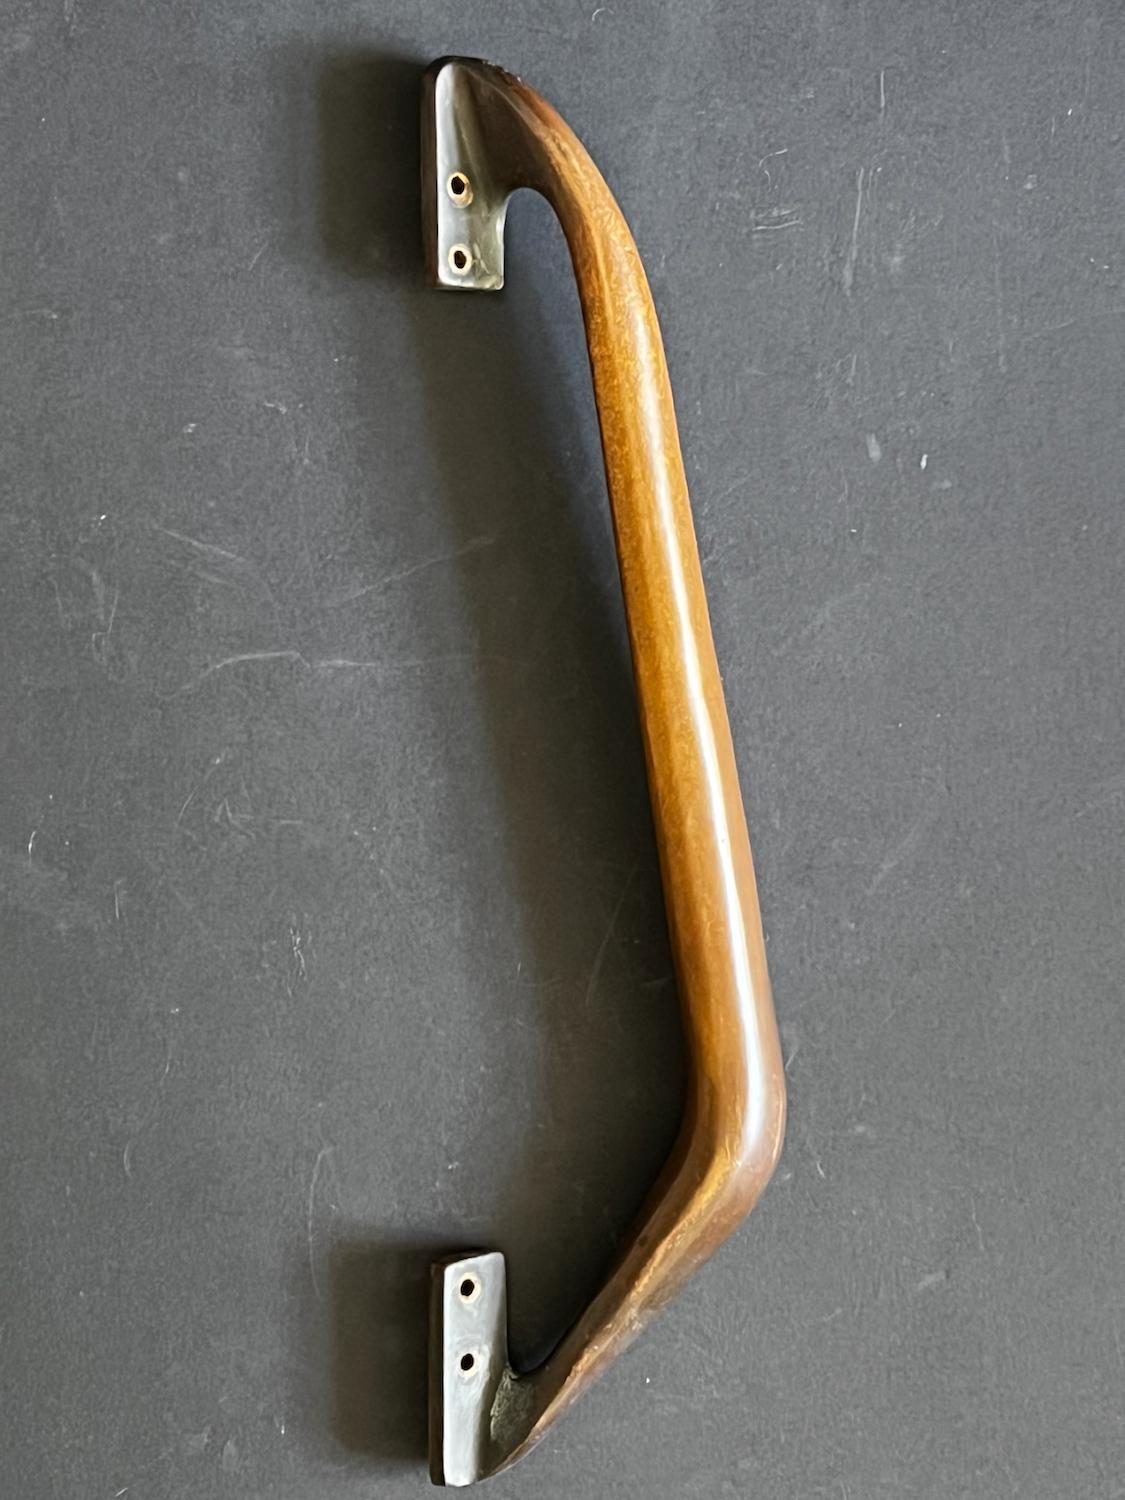 Mid-Century Modern Long Push or Pull Door Handle in Solid Bronze, European, Mid-20th Century For Sale